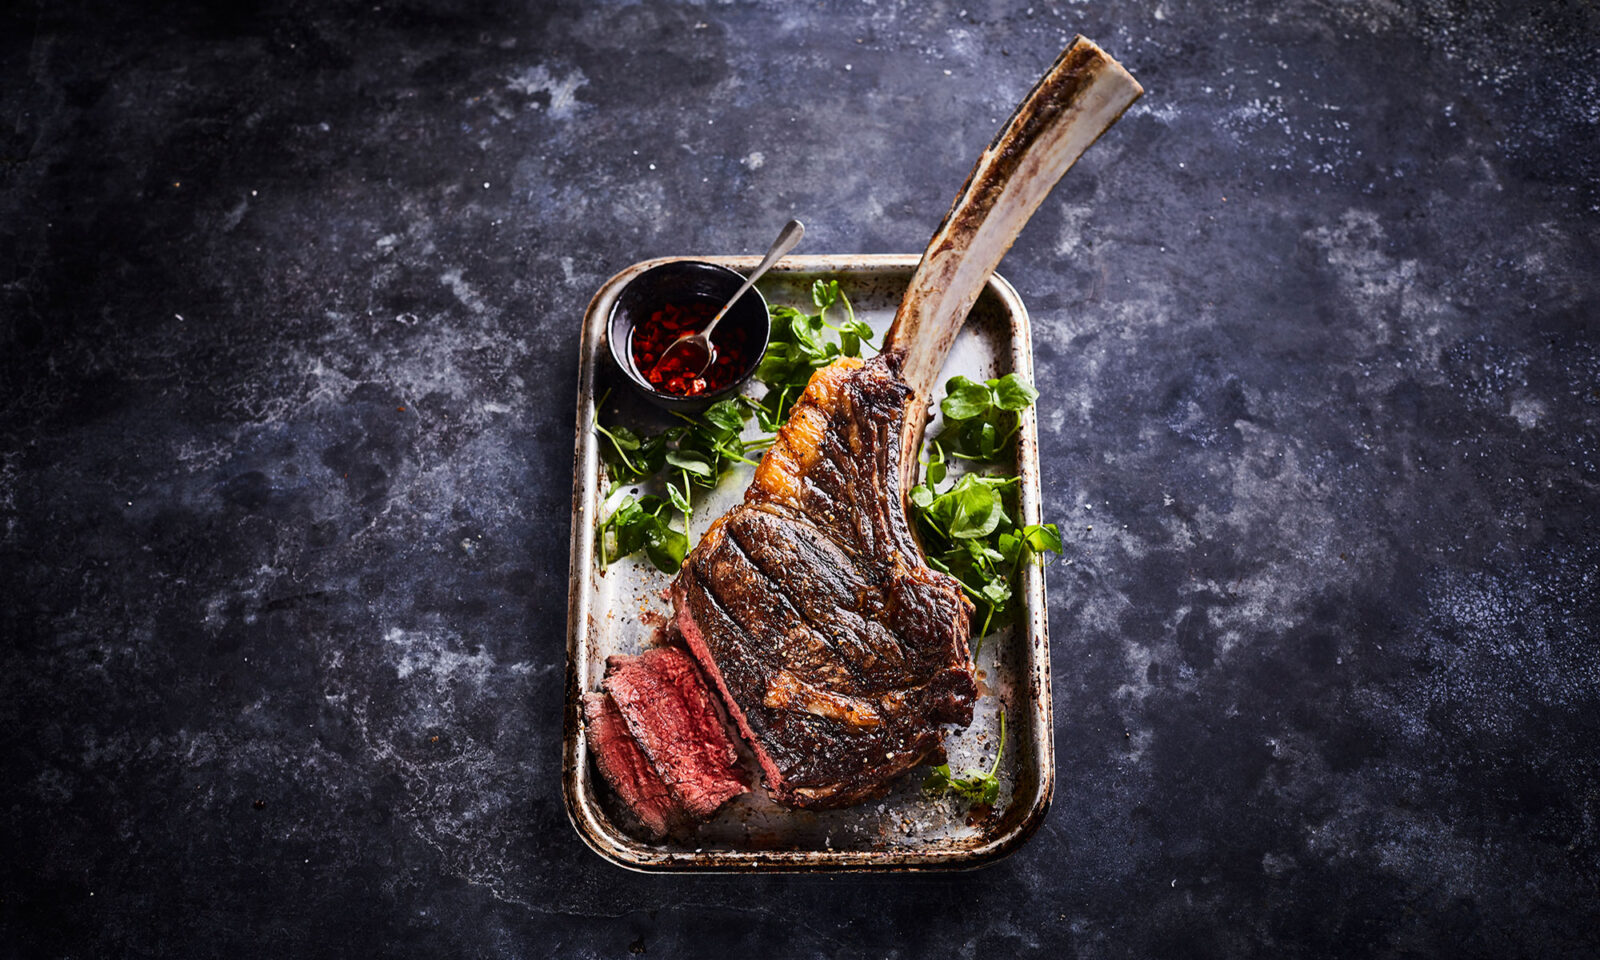 Tipperary Dry Aged Beef, Neworld for brand strategy, design, packaging, and digital needs